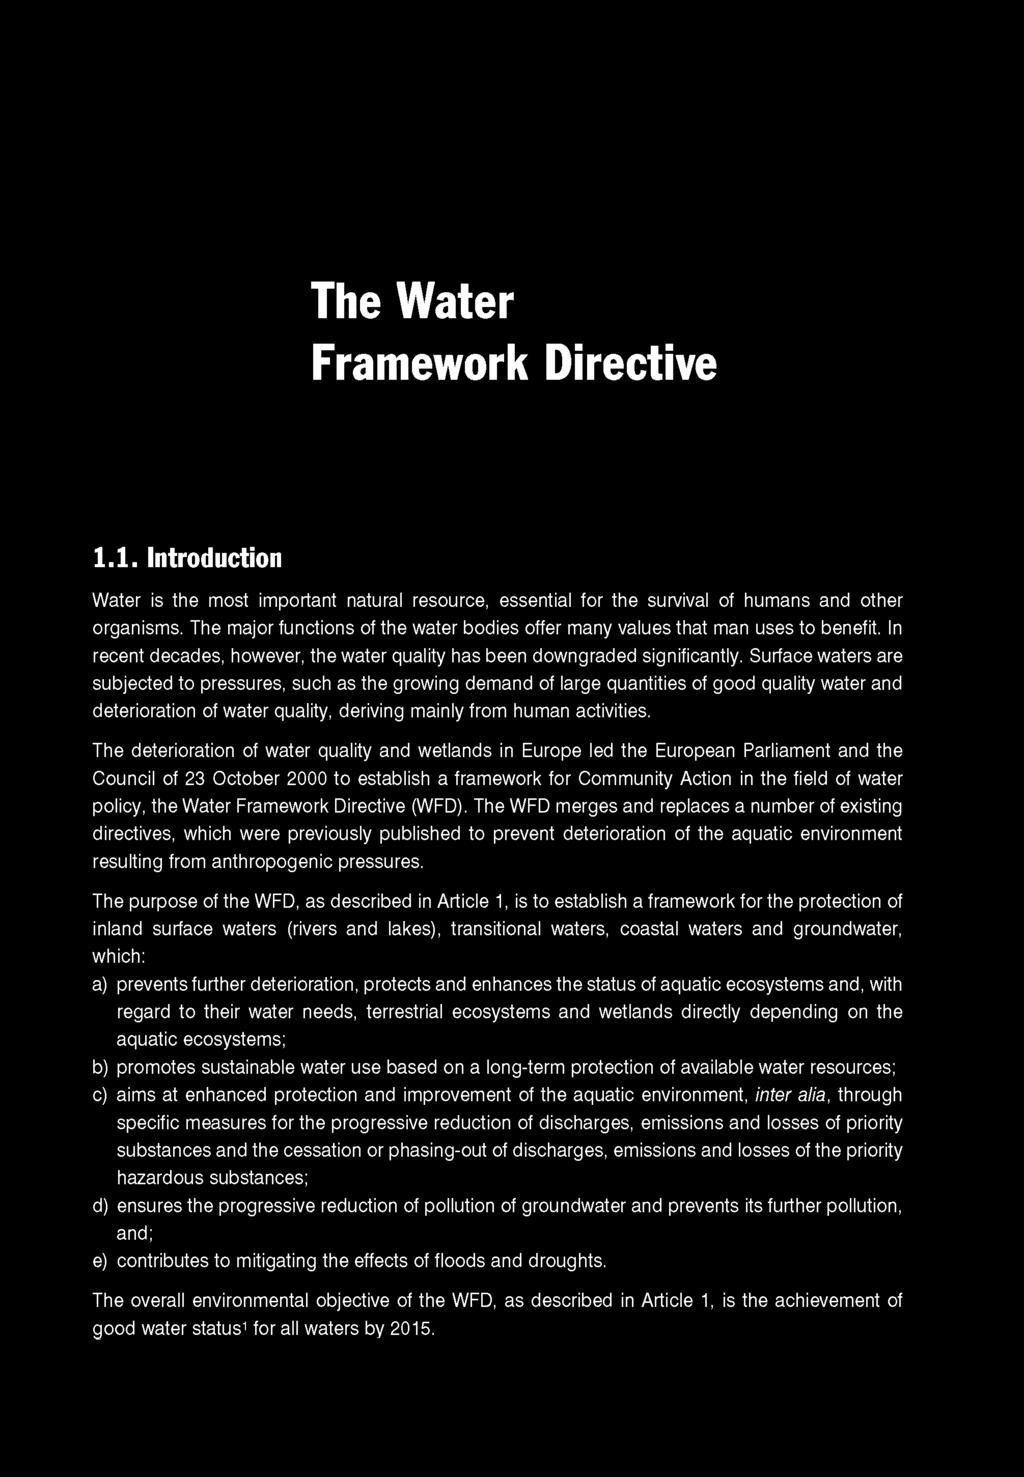 The Water Framework Directive 1.1. Introduction Water is the most important natural resource, essential for the survival of humans and other organisms.